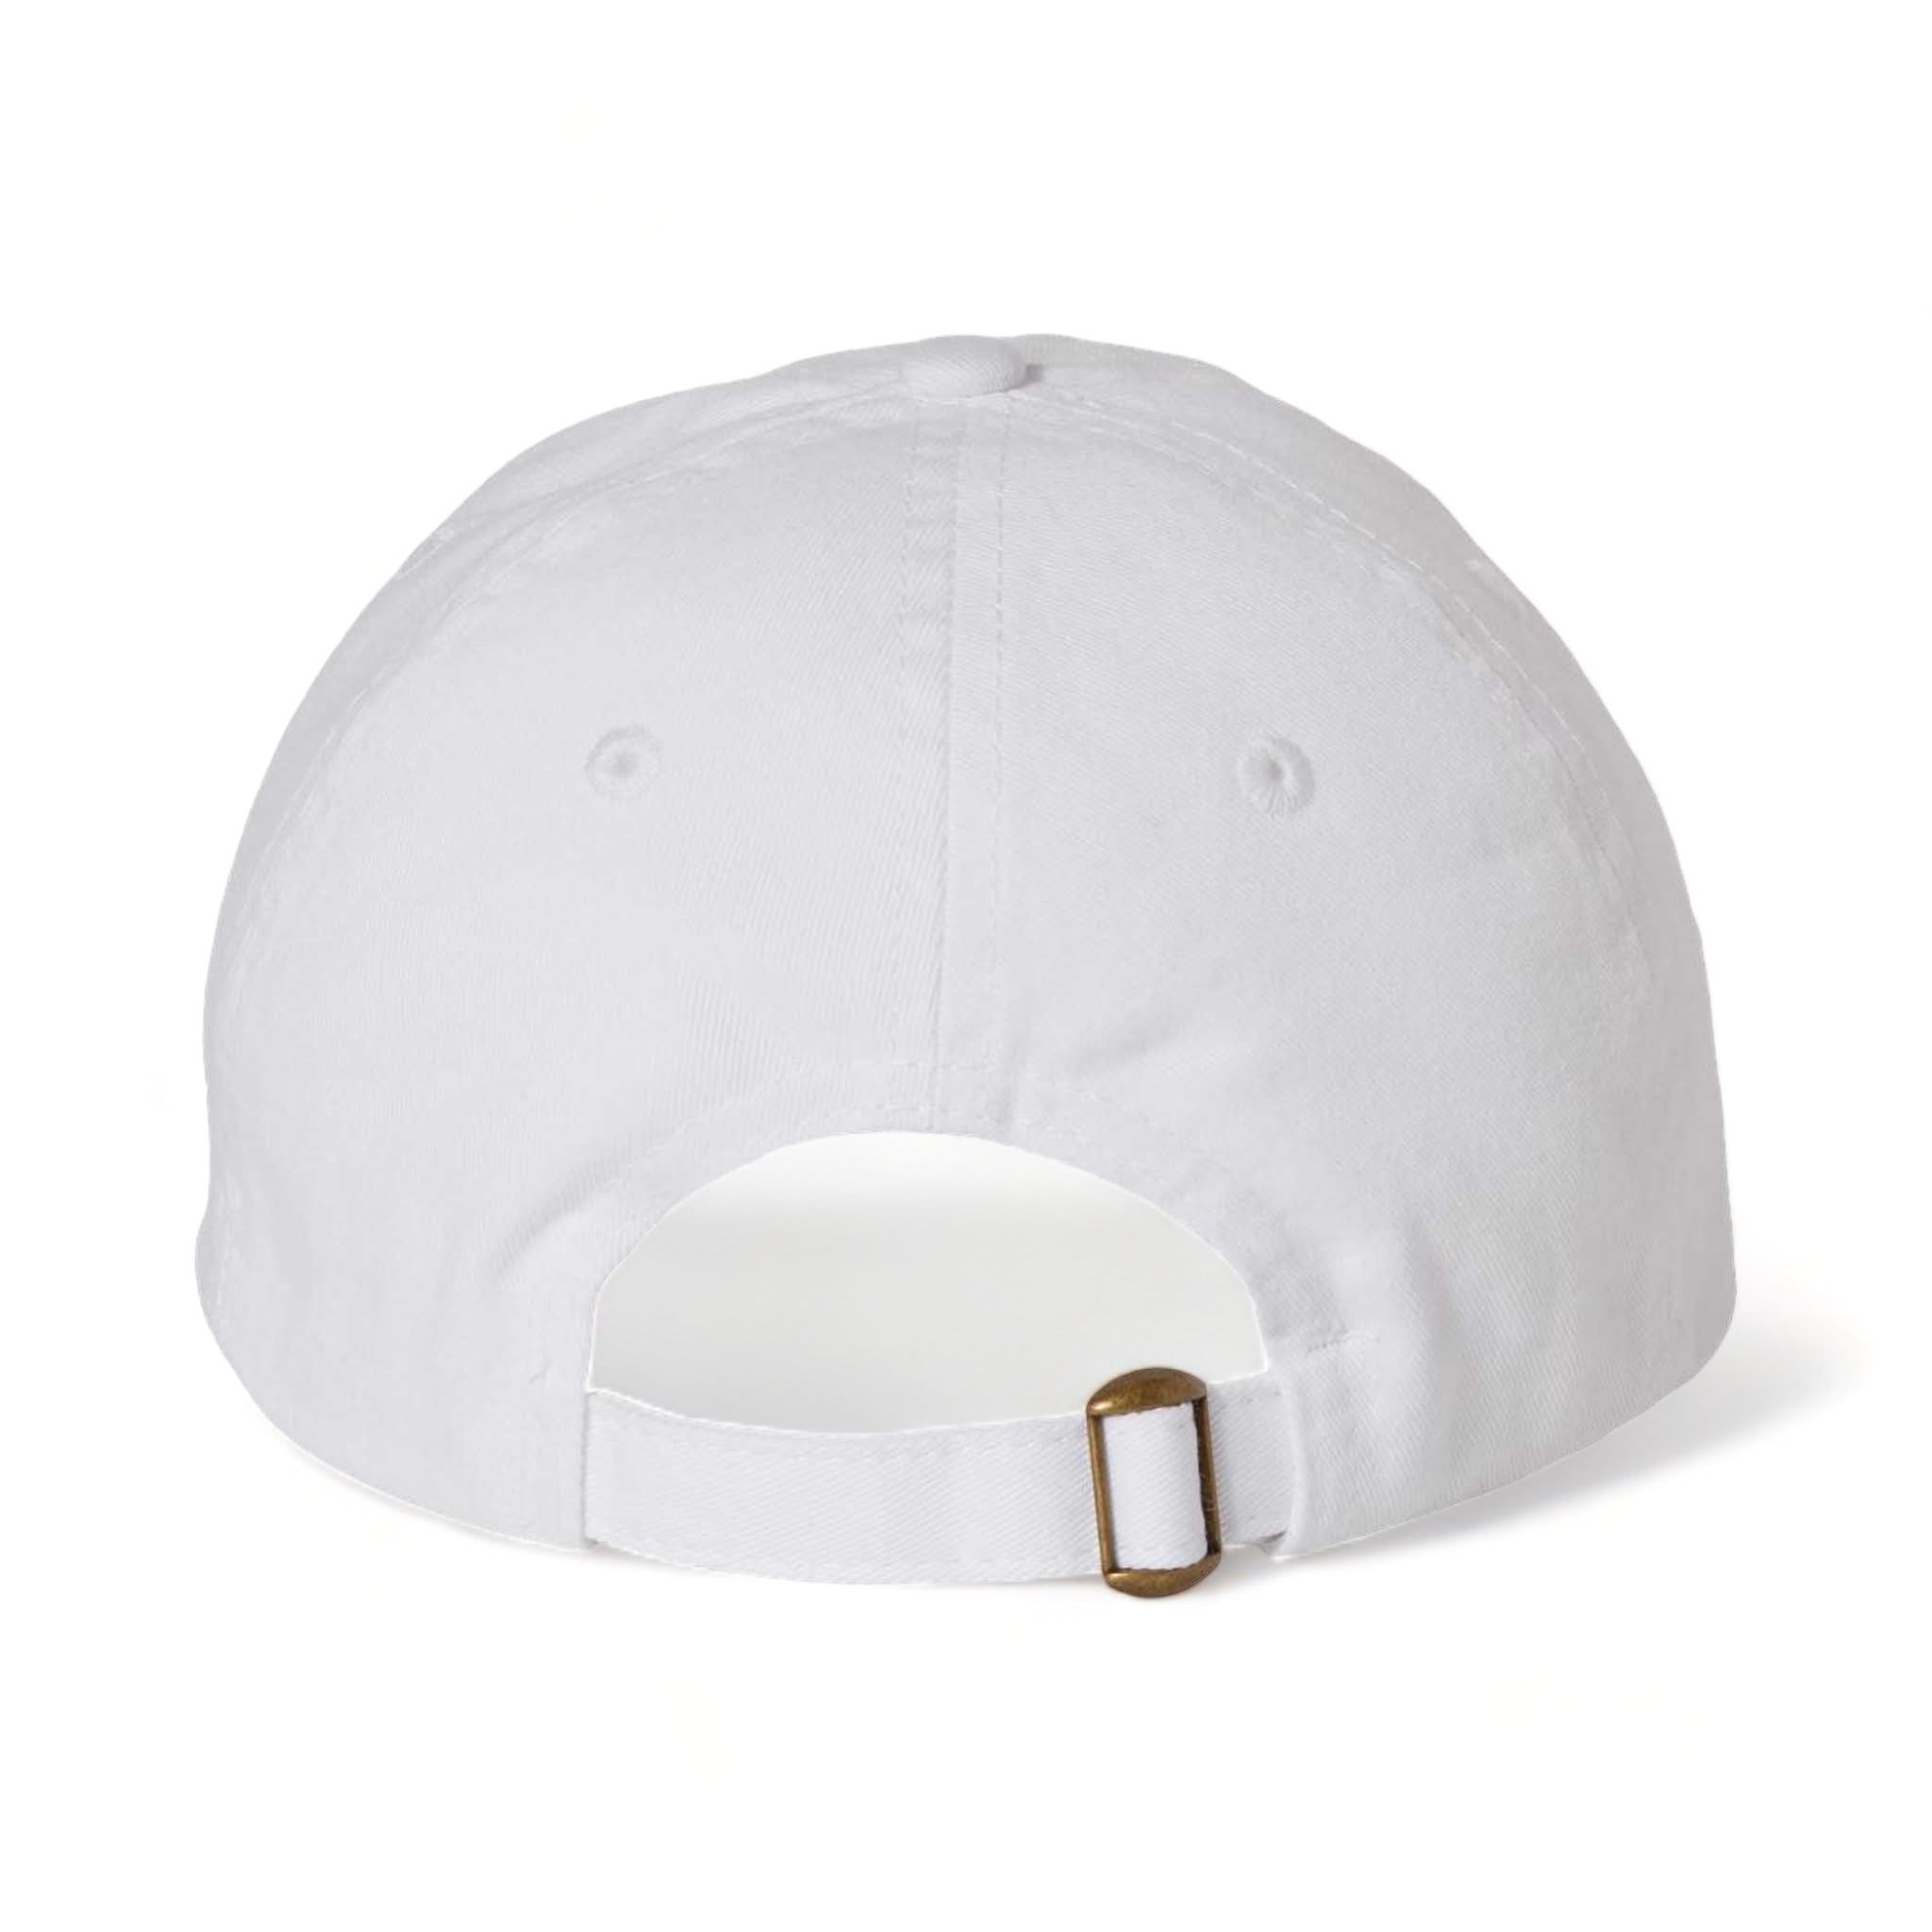 Back view of Valucap VC300A custom hat in white